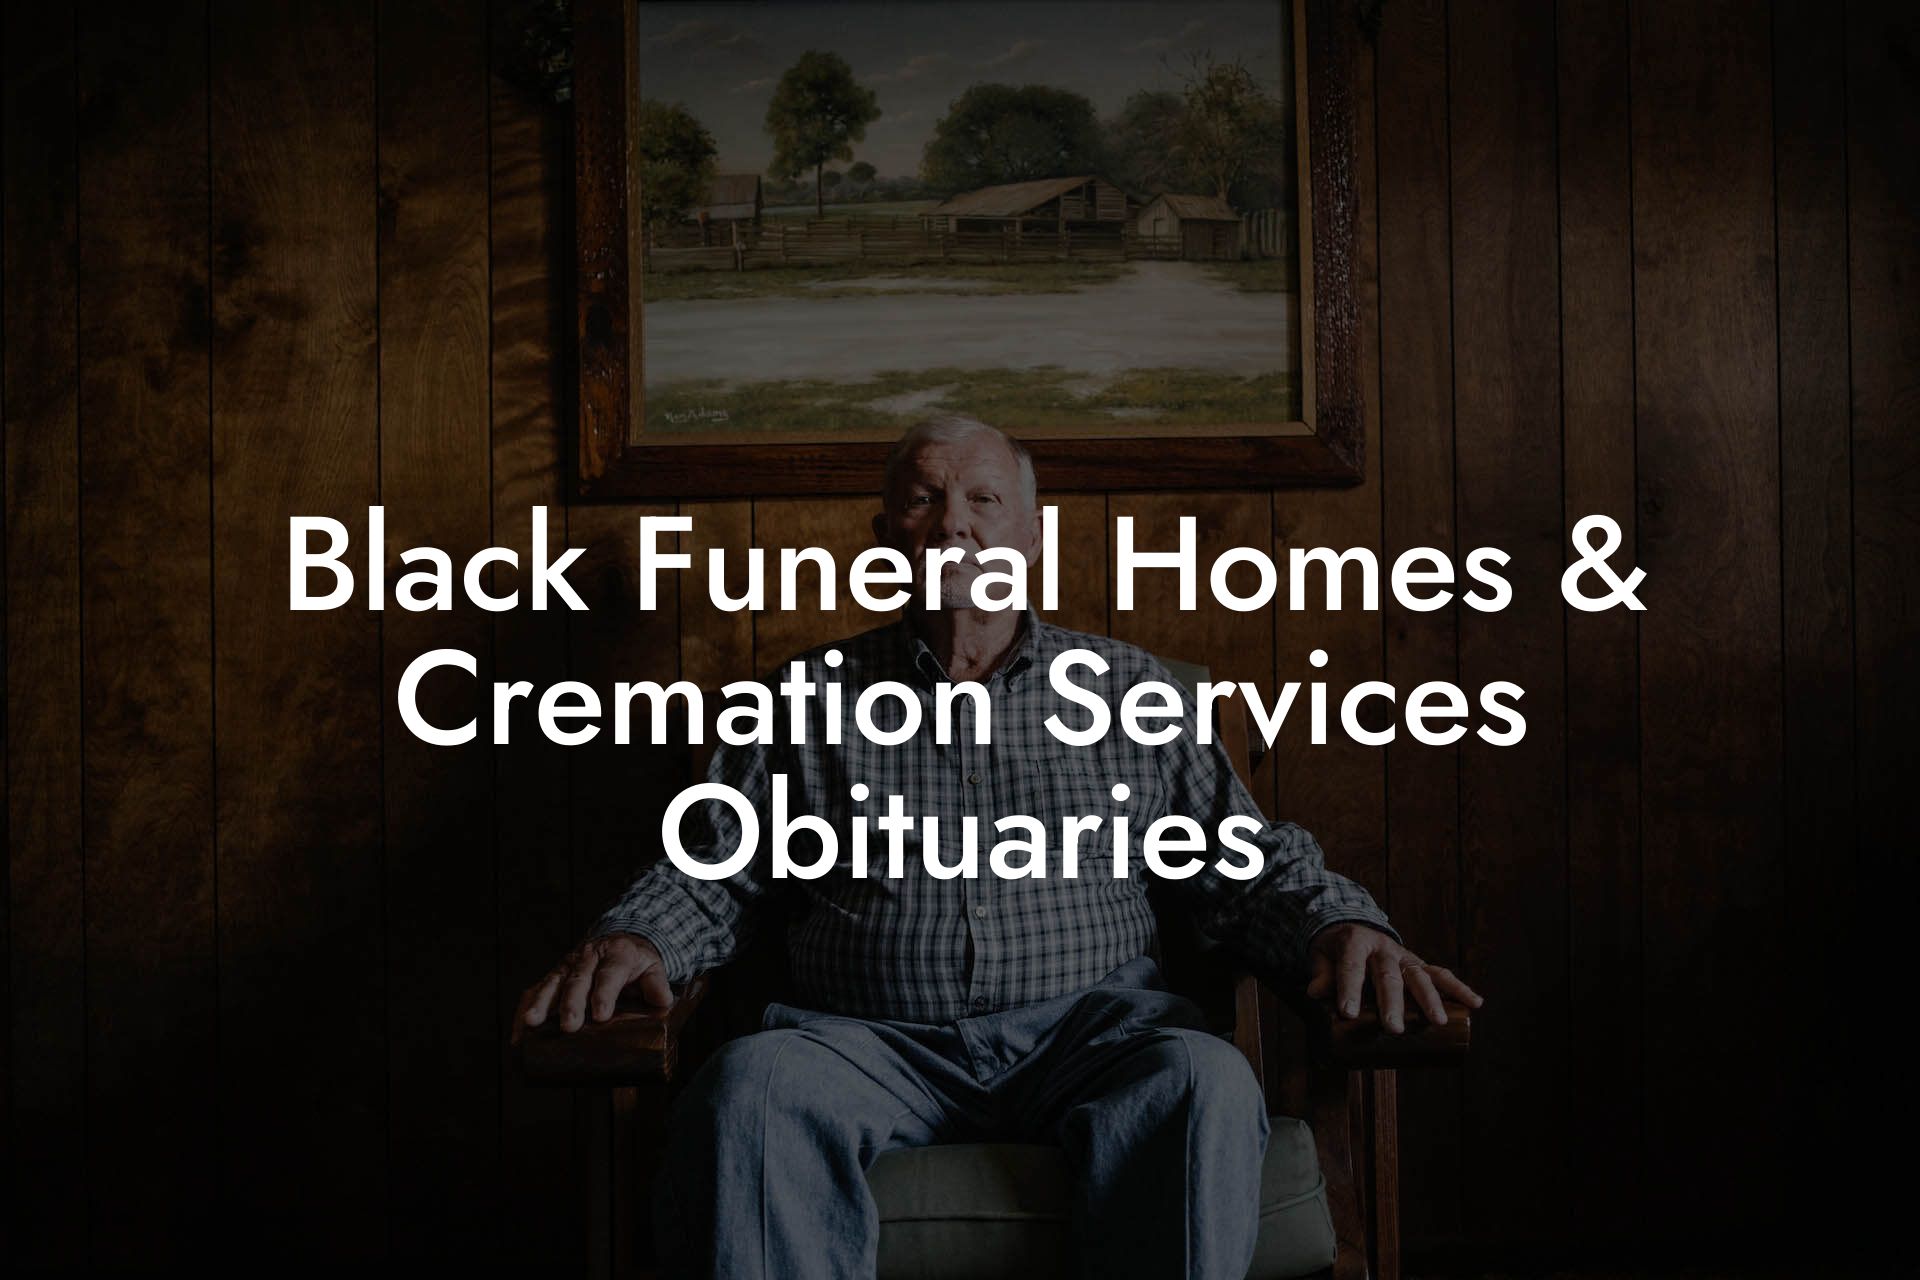 Black Funeral Homes & Cremation Services Obituaries